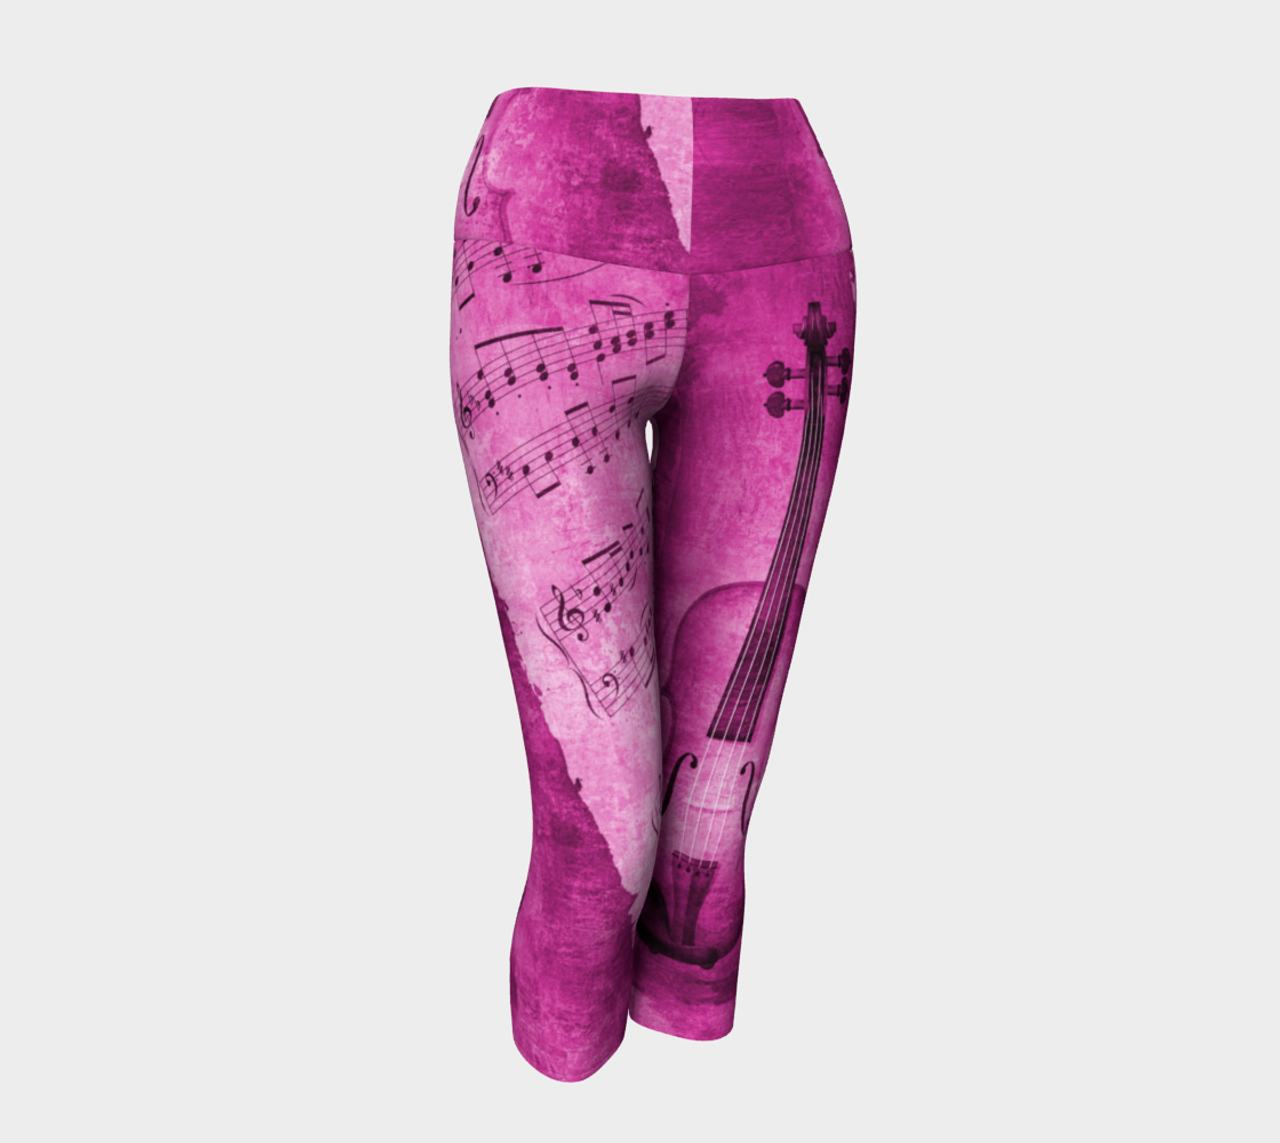 https://cdn11.bigcommerce.com/s-0acfd/images/stencil/1280w/products/2341/3506/preview-yoga-capris-3717354-front__90610.1596487940.png